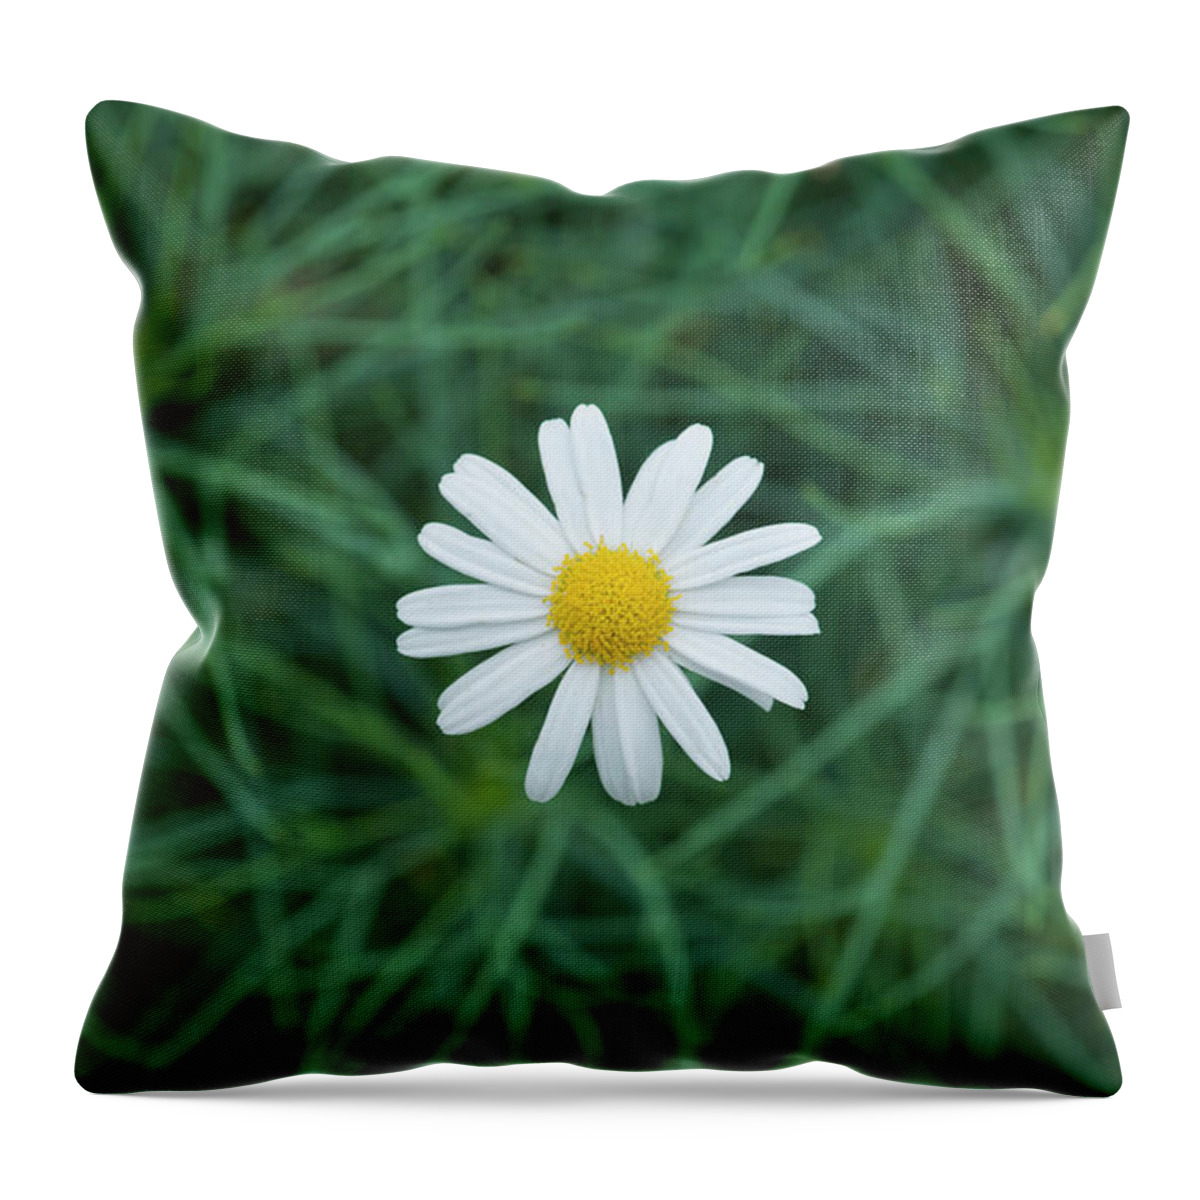 Argyranthemum Gracile Chelsea Girl Throw Pillow featuring the photograph Marguerite Chelsea Girl Flower by Tim Gainey